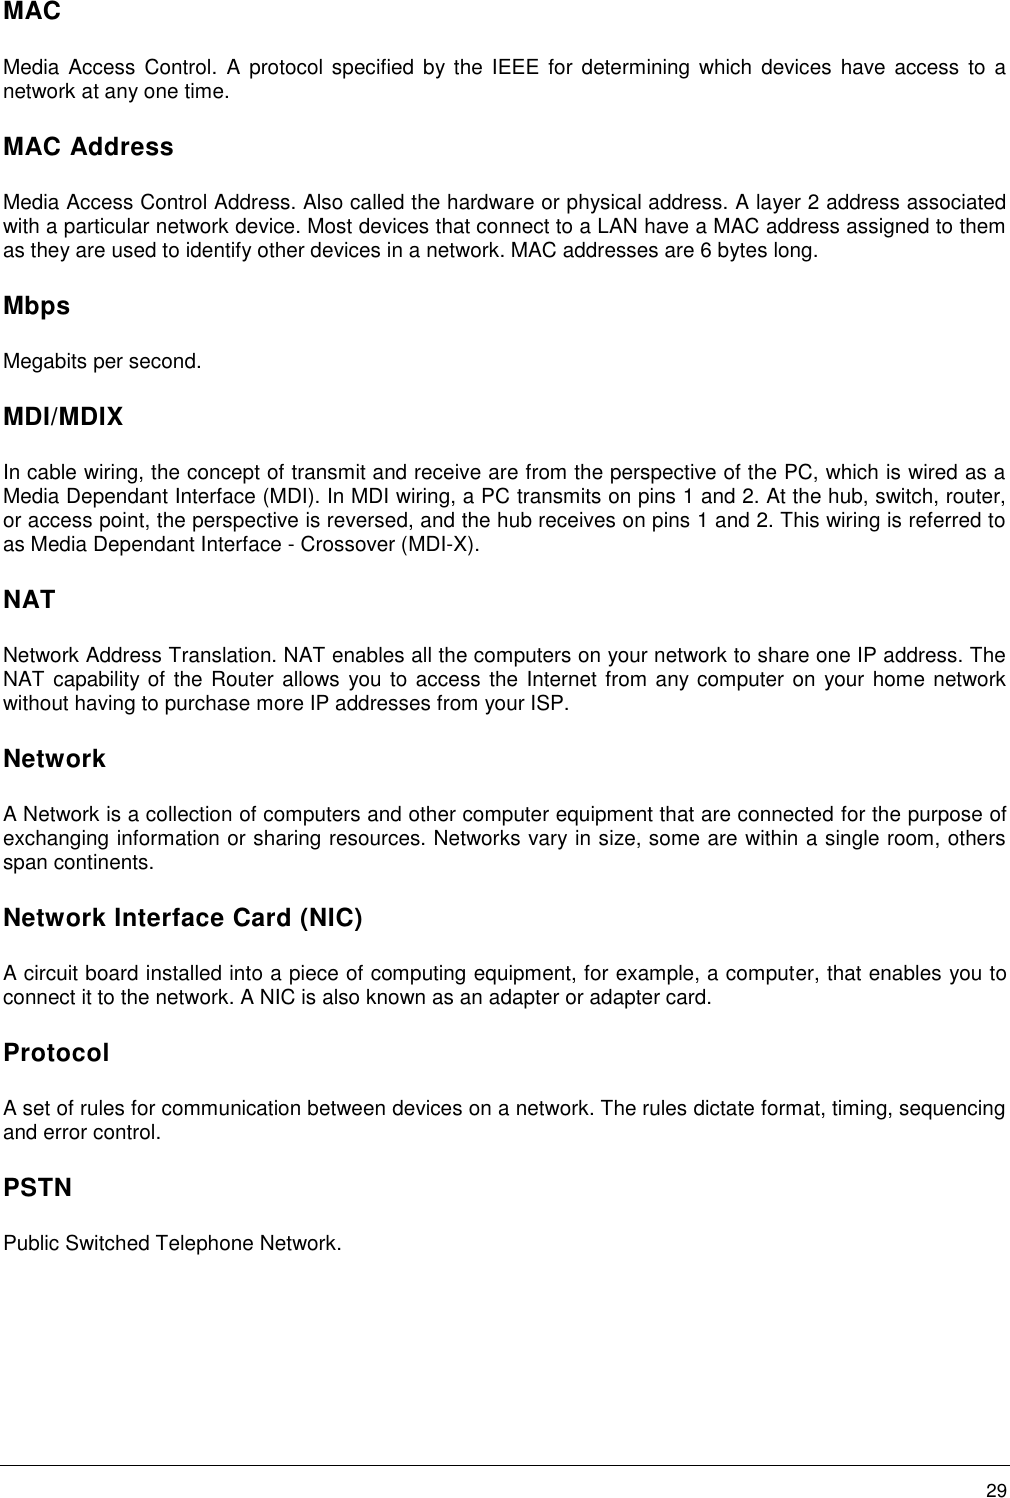        29 MAC Media Access  Control.  A protocol  specified  by the  IEEE  for determining  which devices  have access  to a network at any one time. MAC Address Media Access Control Address. Also called the hardware or physical address. A layer 2 address associated with a particular network device. Most devices that connect to a LAN have a MAC address assigned to them as they are used to identify other devices in a network. MAC addresses are 6 bytes long. Mbps Megabits per second. MDI/MDIX In cable wiring, the concept of transmit and receive are from the perspective of the PC, which is wired as a Media Dependant Interface (MDI). In MDI wiring, a PC transmits on pins 1 and 2. At the hub, switch, router, or access point, the perspective is reversed, and the hub receives on pins 1 and 2. This wiring is referred to as Media Dependant Interface - Crossover (MDI-X). NAT Network Address Translation. NAT enables all the computers on your network to share one IP address. The NAT capability of the Router allows you to access the Internet from any computer on your home network without having to purchase more IP addresses from your ISP.  Network A Network is a collection of computers and other computer equipment that are connected for the purpose of exchanging information or sharing resources. Networks vary in size, some are within a single room, others span continents. Network Interface Card (NIC) A circuit board installed into a piece of computing equipment, for example, a computer, that enables you to connect it to the network. A NIC is also known as an adapter or adapter card. Protocol A set of rules for communication between devices on a network. The rules dictate format, timing, sequencing and error control. PSTN Public Switched Telephone Network. 